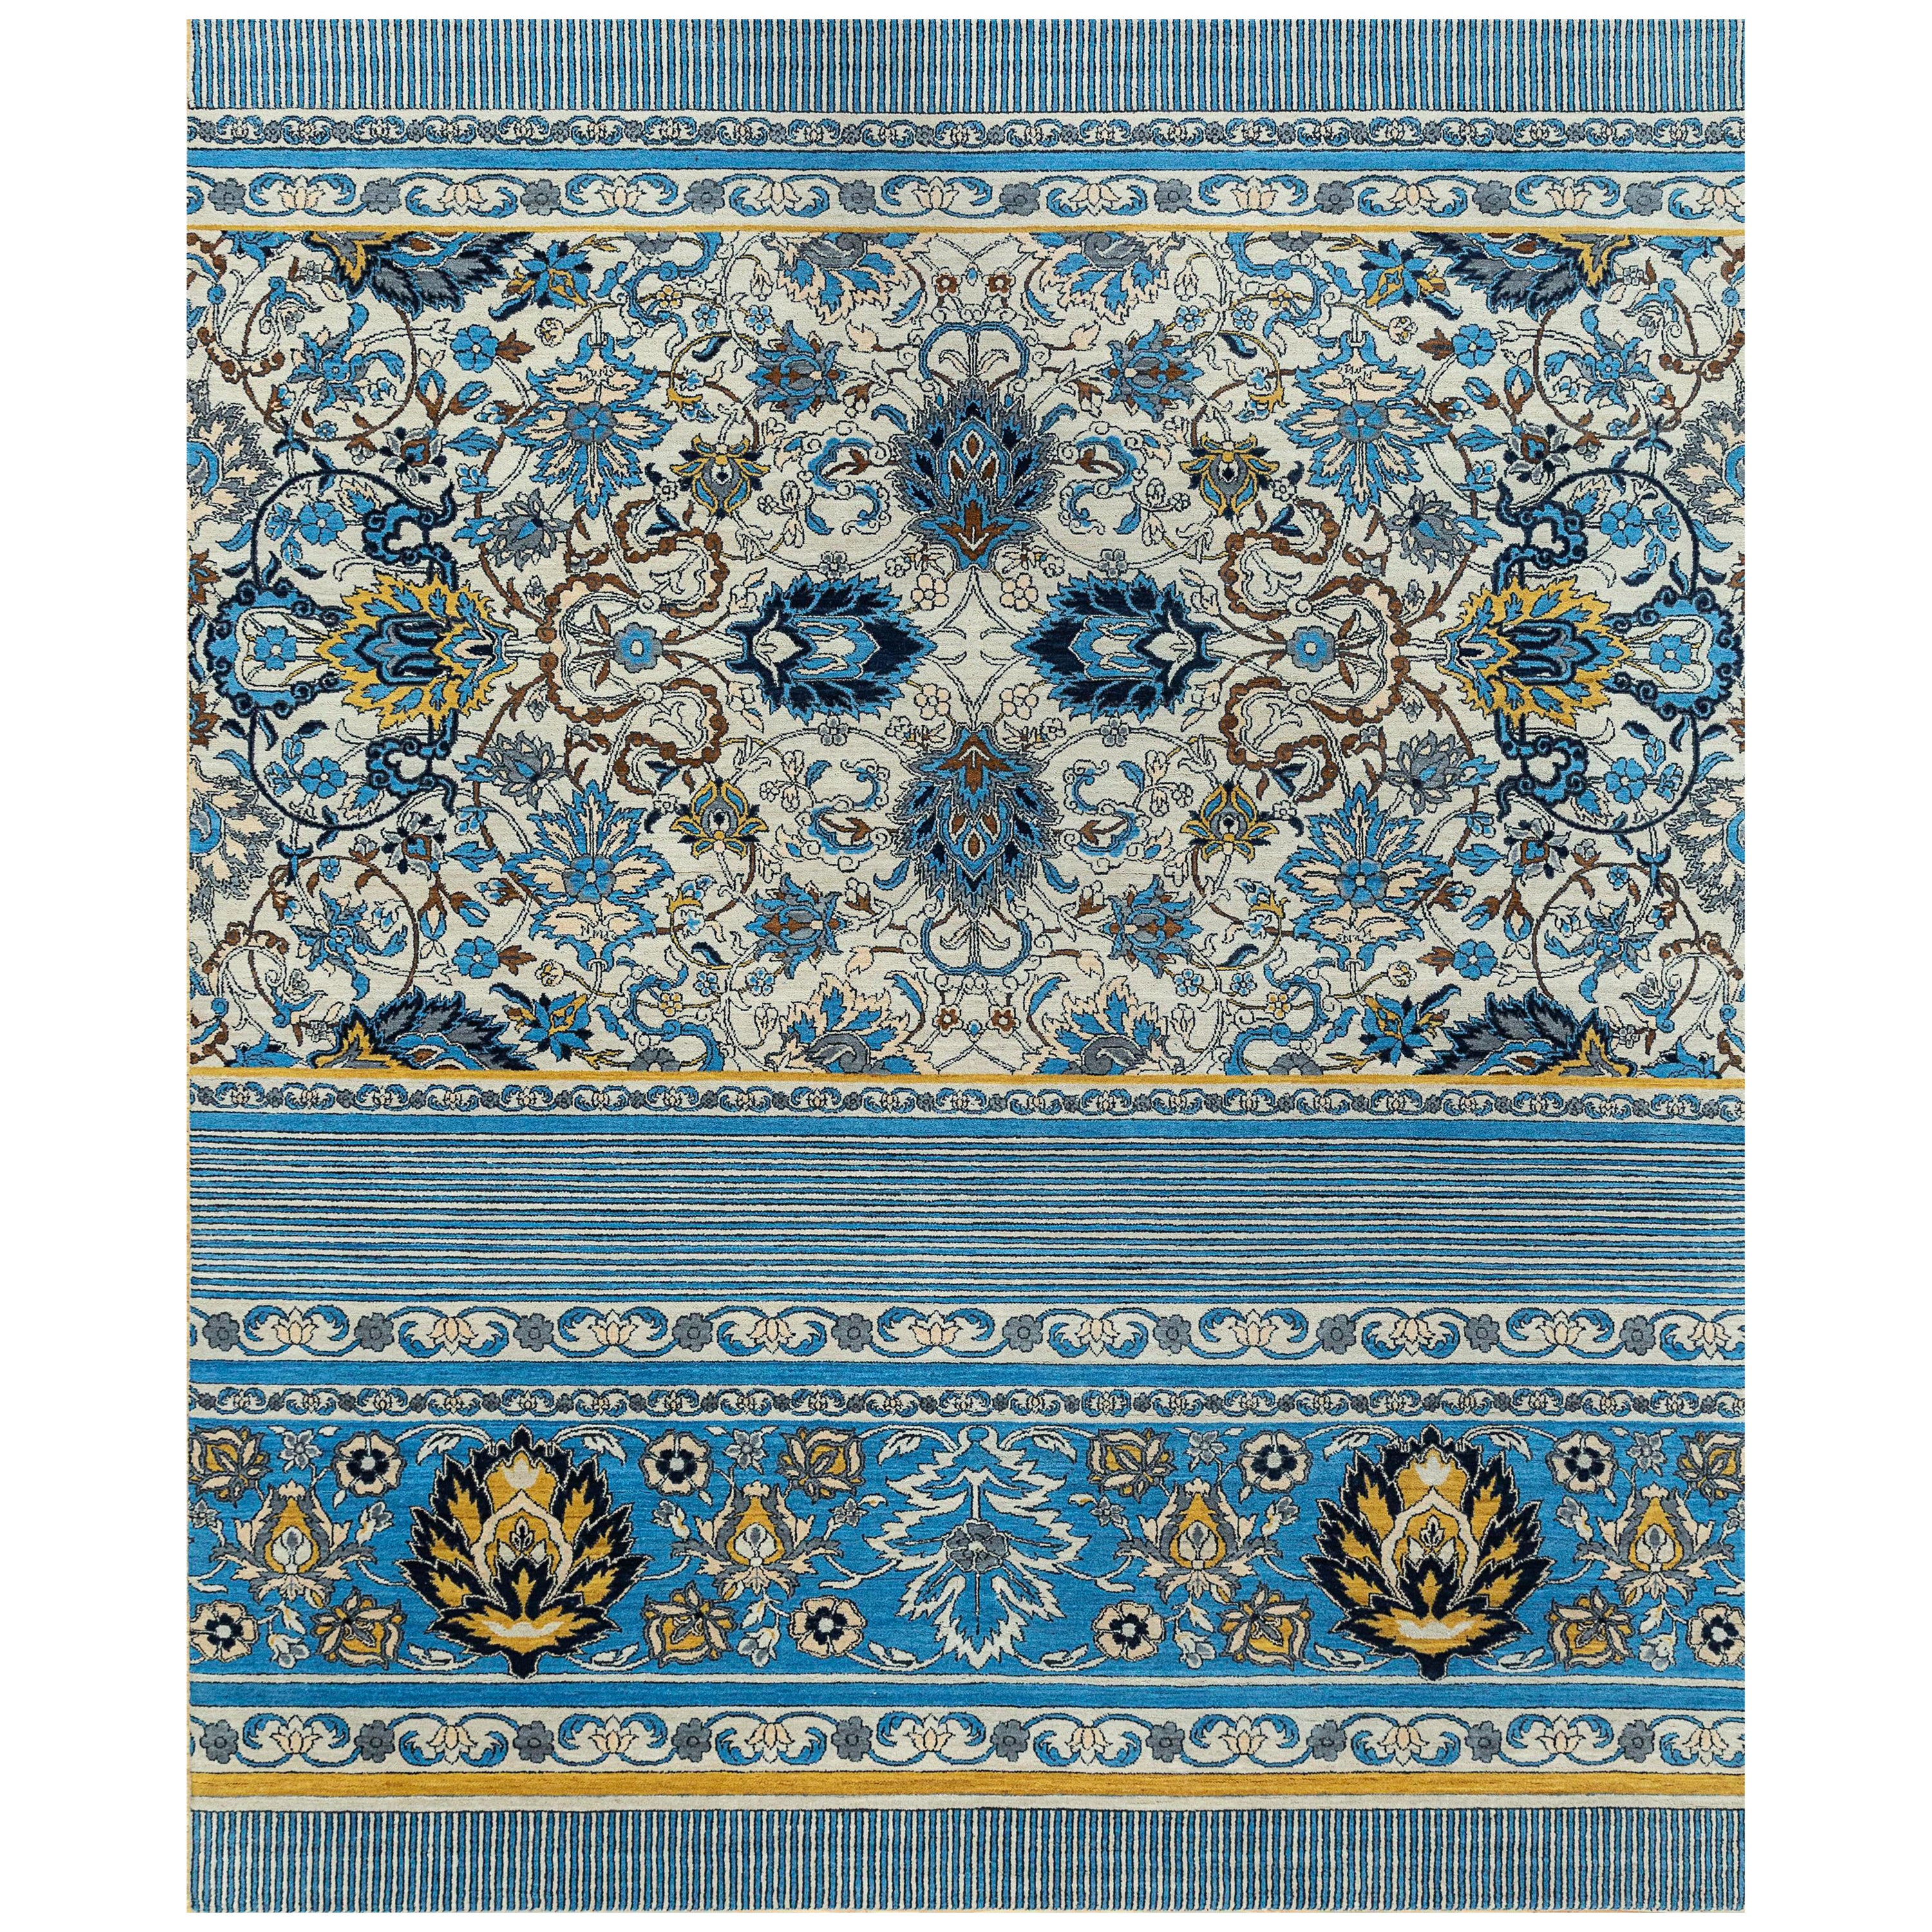 Blooming Veil Antique White & Ombre Blue 270x360 cm Hand Knotted Rug